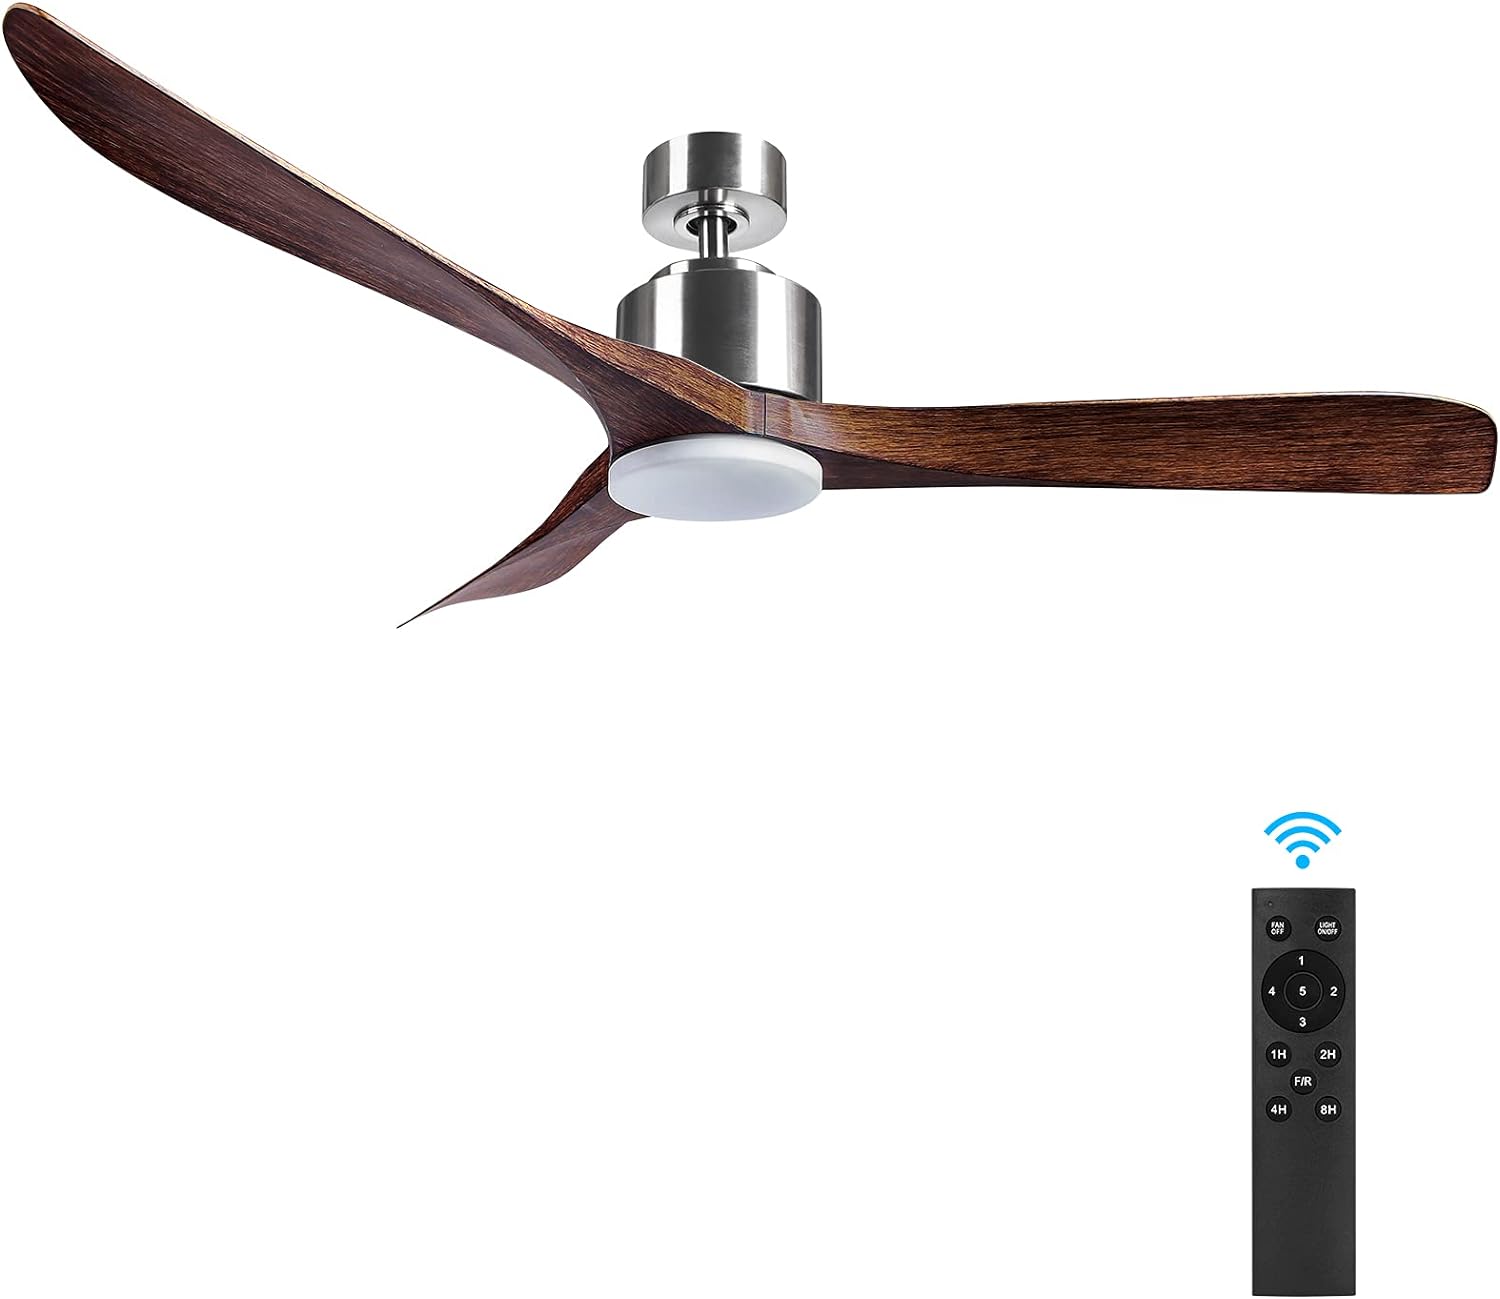 Ceiling Fan with Lights,Wisful Modern 56 Inch Ceiling Fans with Remote Control and Led Light,Rustic Farmhouse Ceiling Fan with Quiet 5 Speeds Reversible Motor (Wood Grain Color)